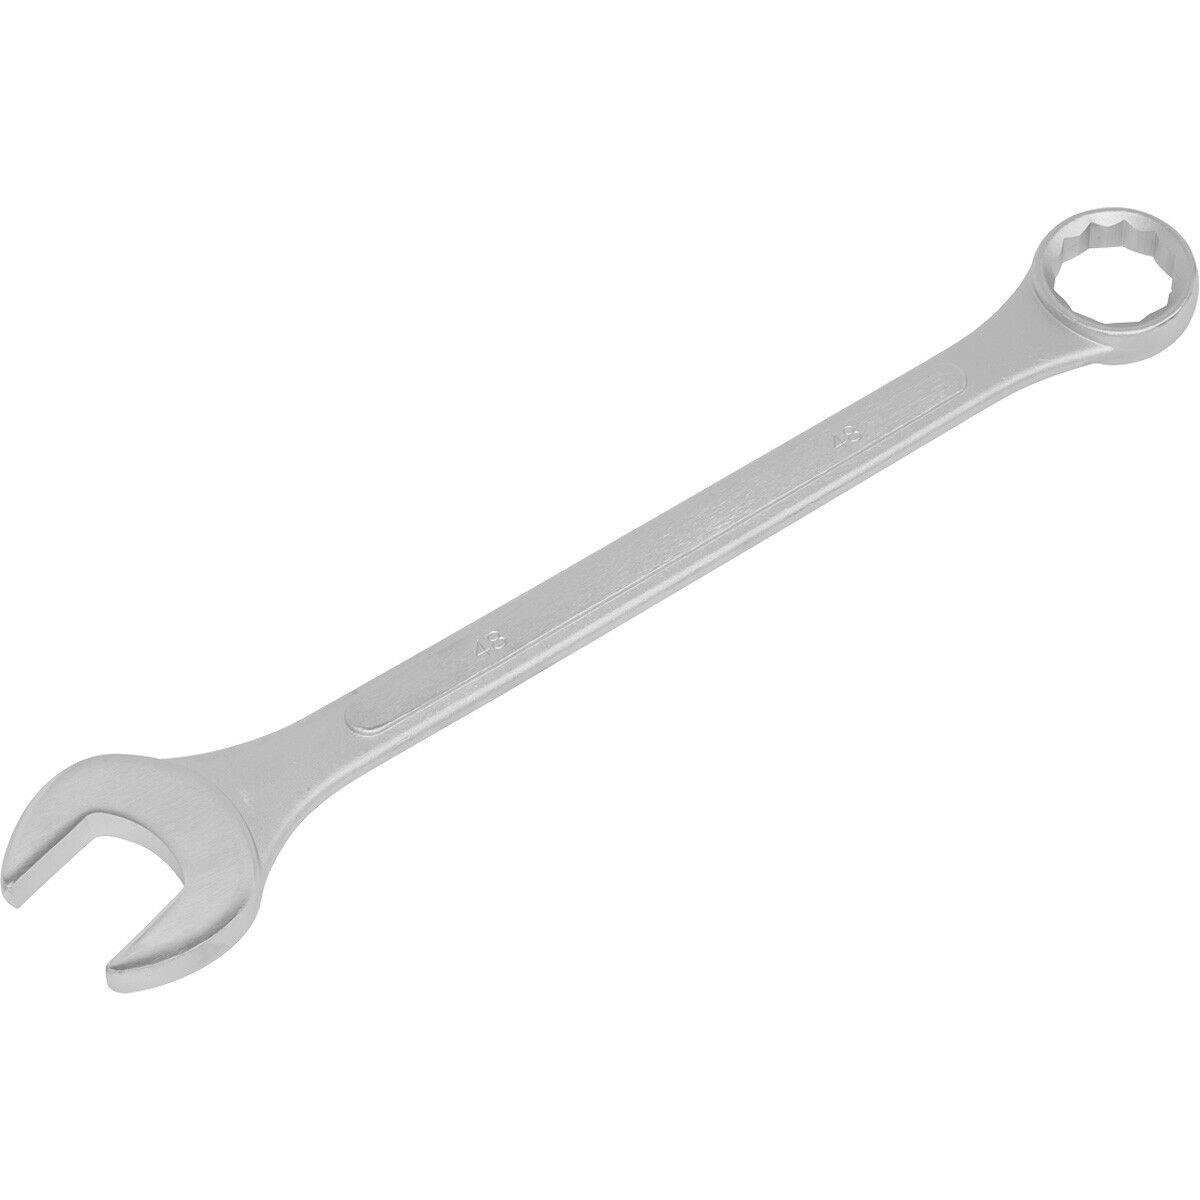 48mm Large Combination Spanner - Drop Forged Steel - Chrome Plated Polished Jaws